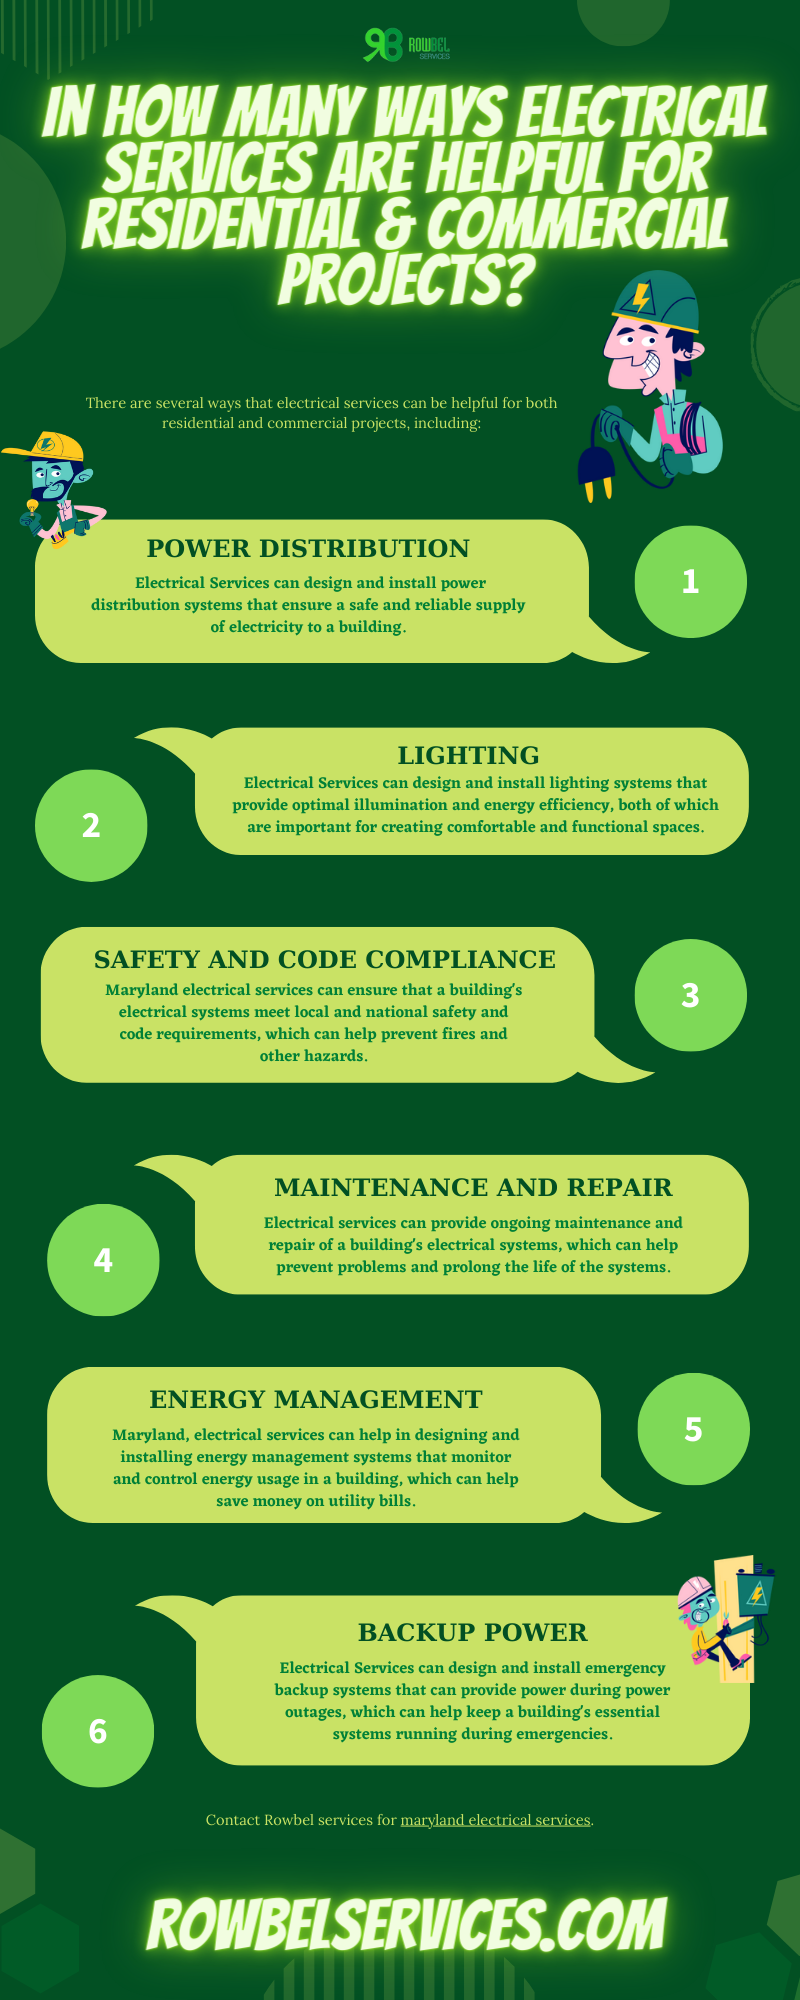 In How Many Ways Electrical Services Are Helpful For Residential & Commercial Projects?